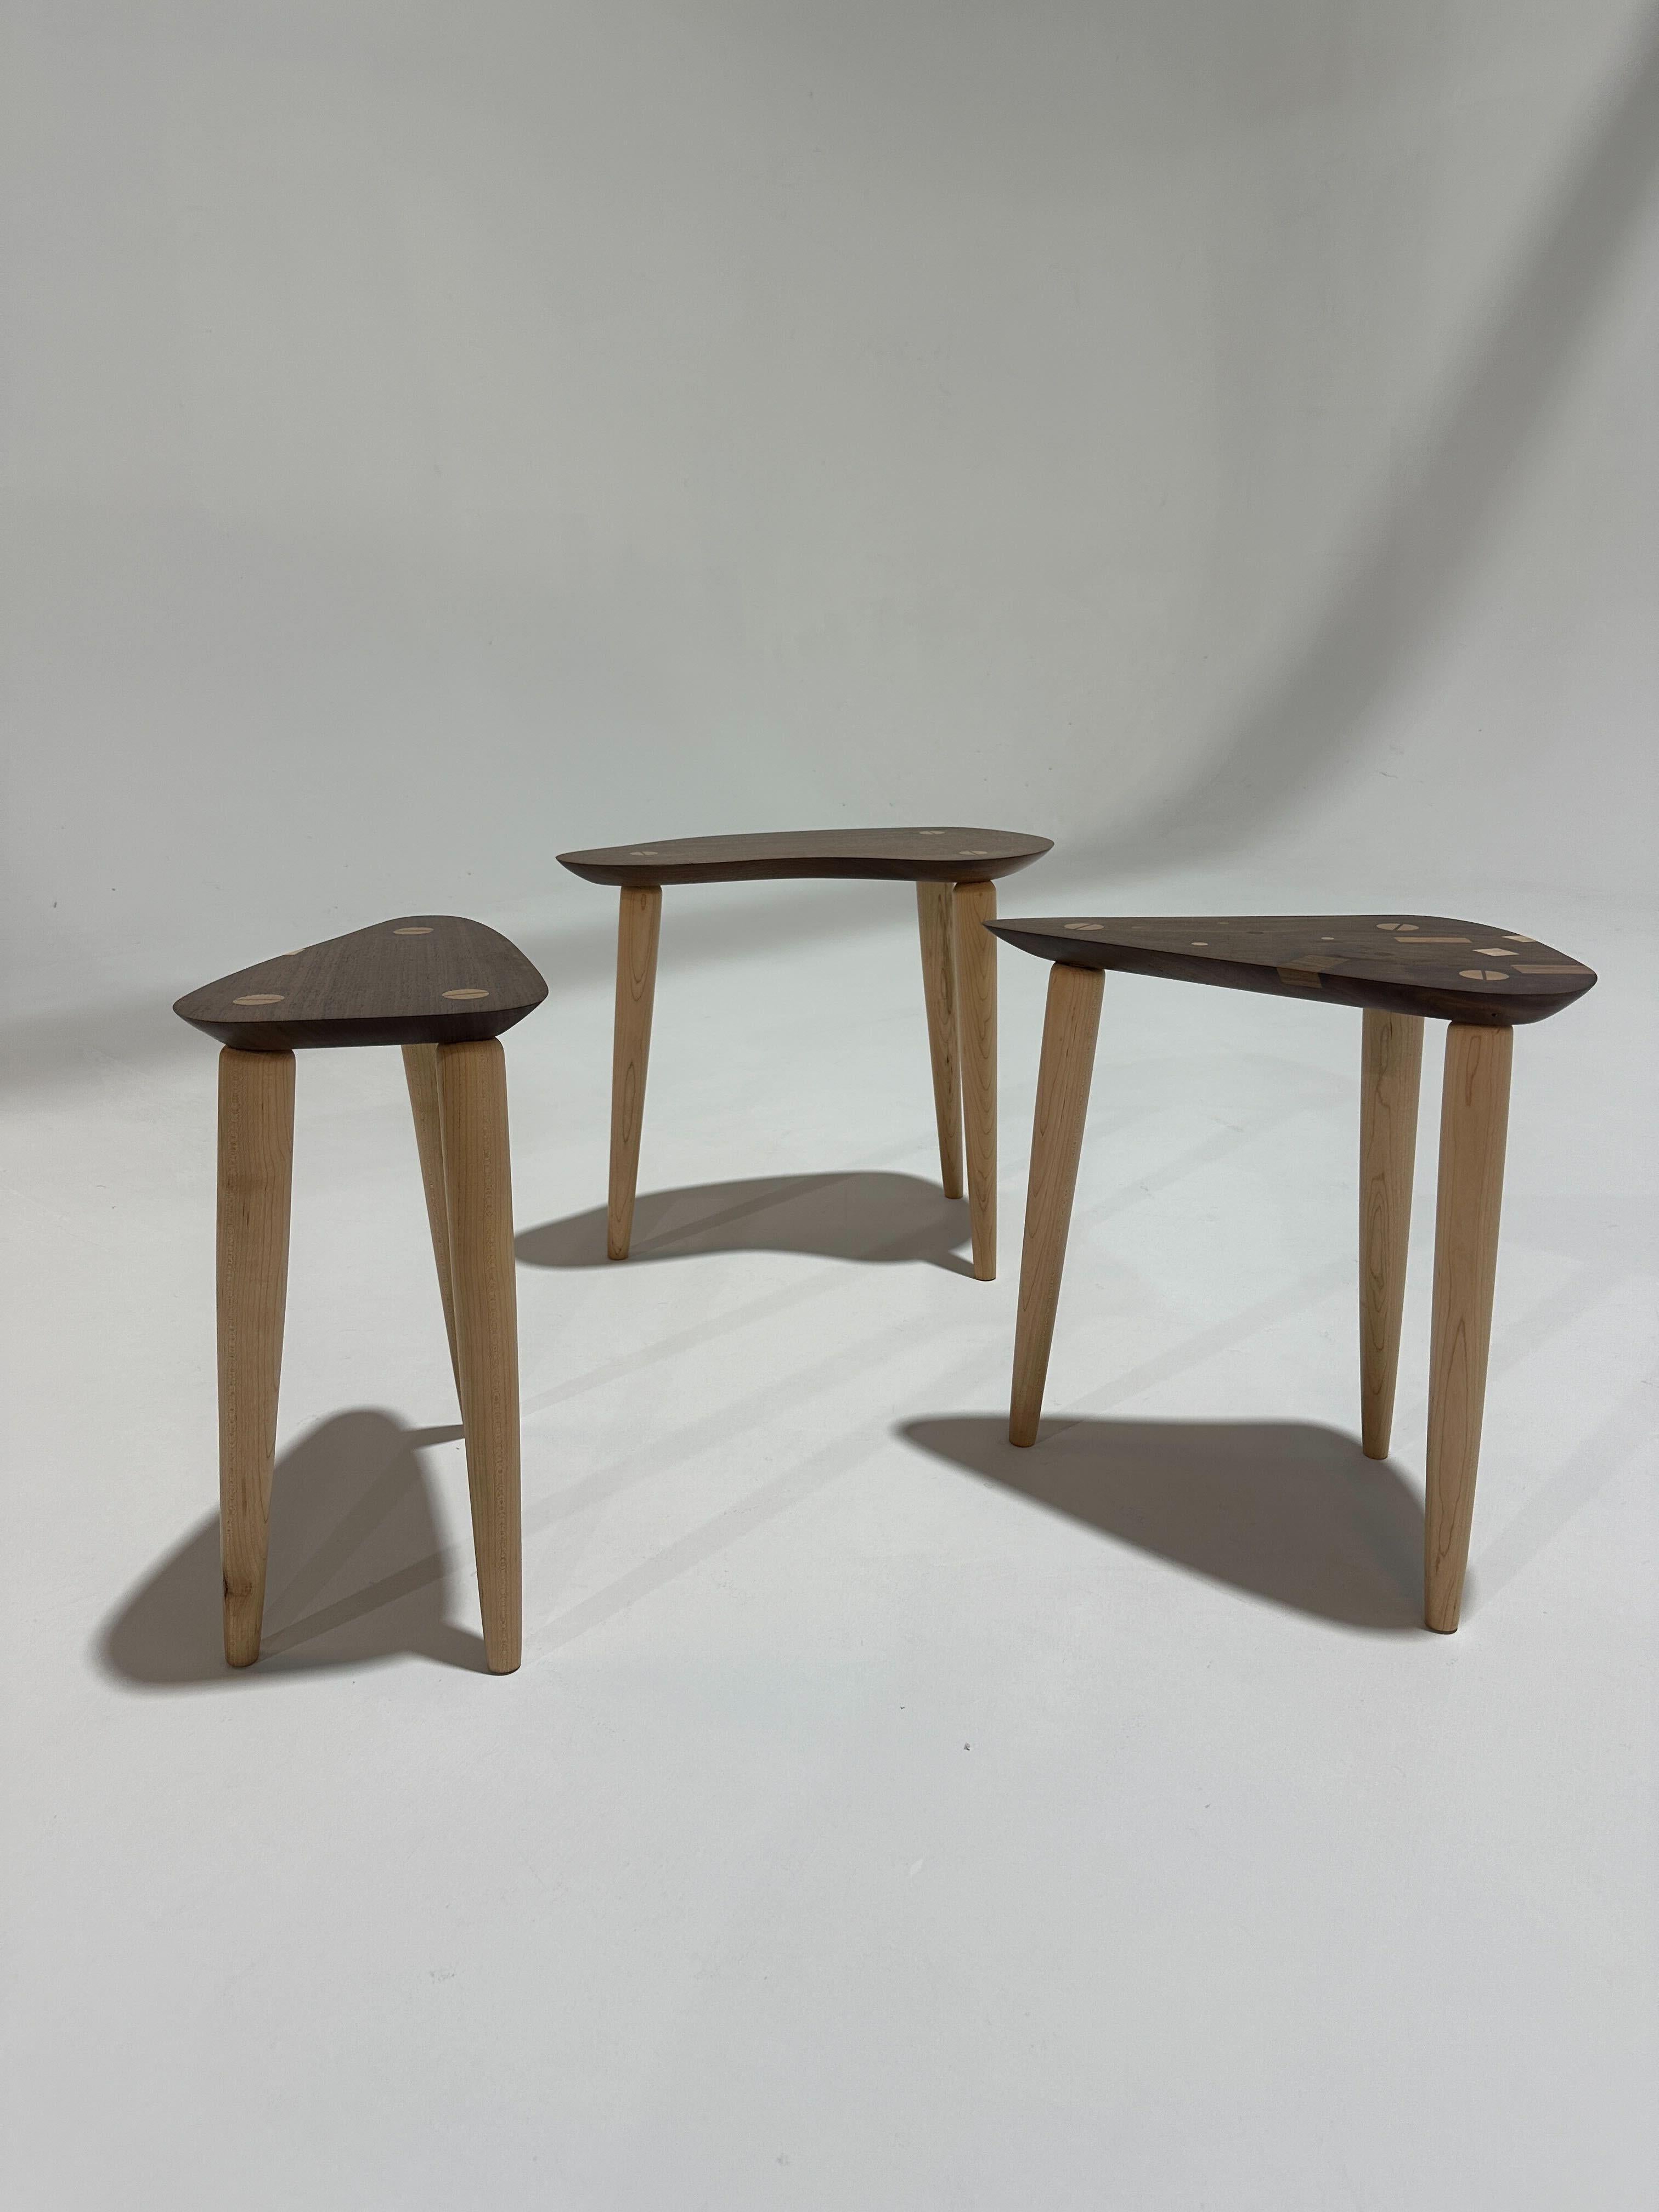 Michael Oates - Cattywampus Turned Leg Side Table Set of 3 In Excellent Condition For Sale In Alpha, NJ